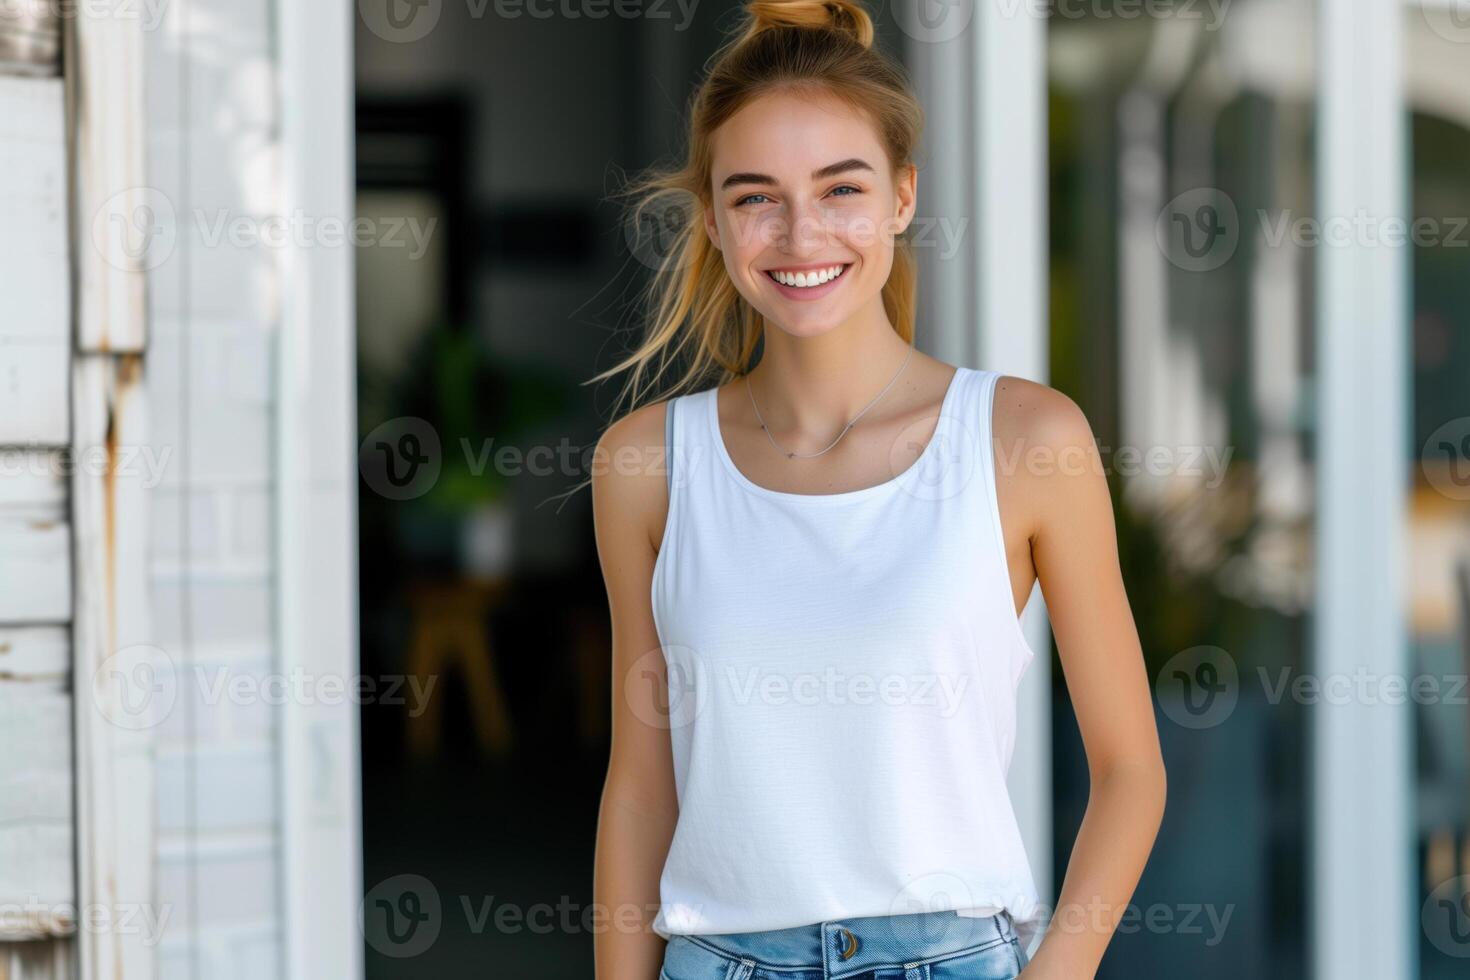 Cheerful young woman with blonde bun wearing a white tank top and jeans outside a modern home photo